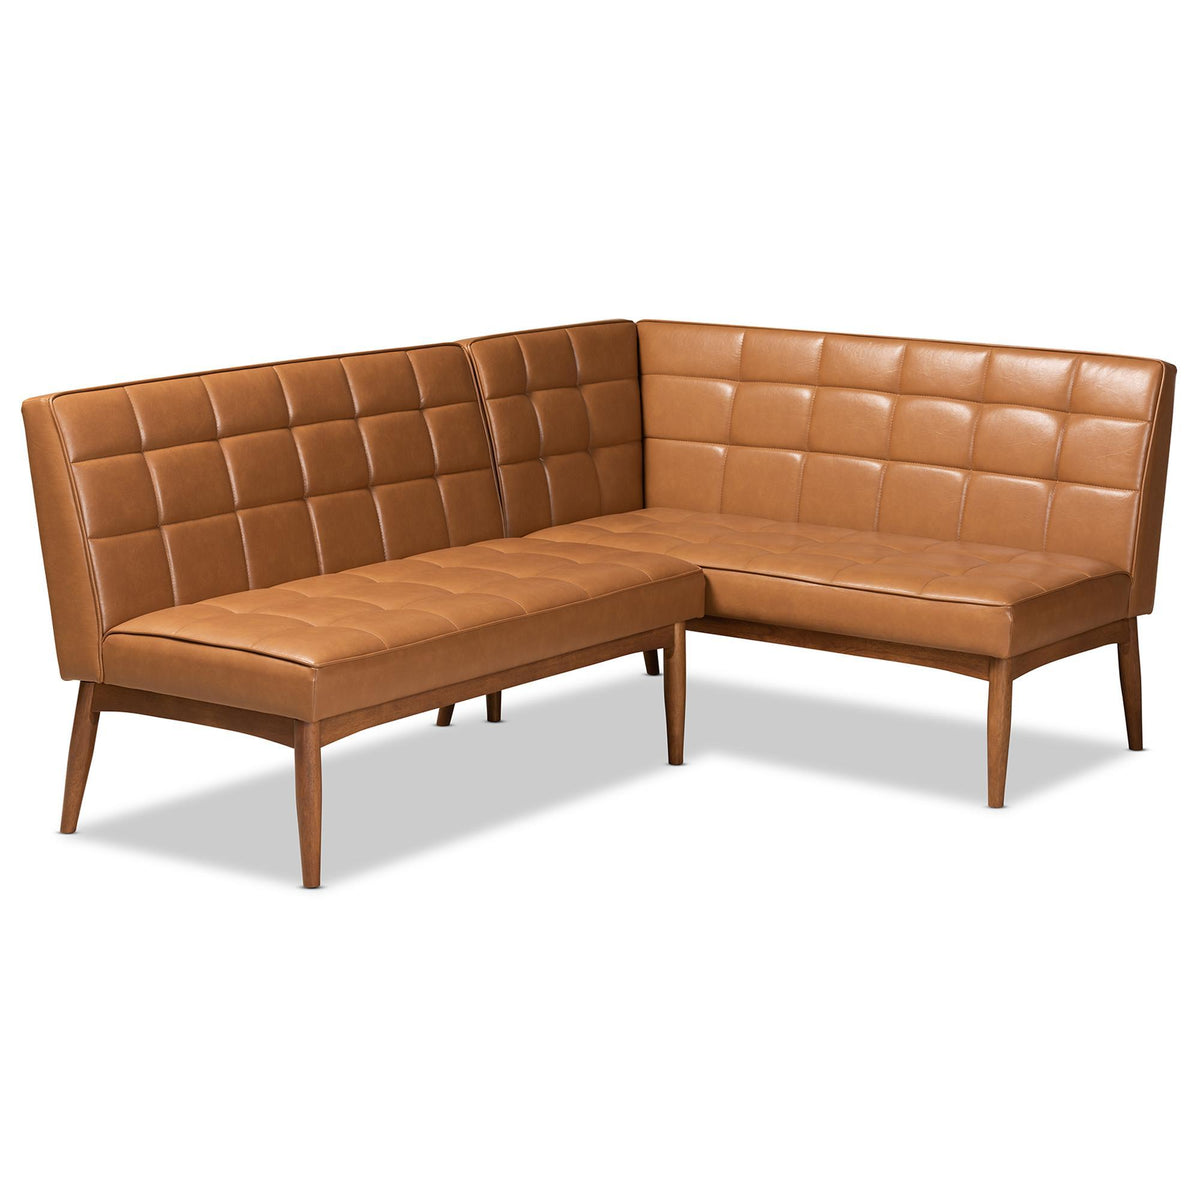 Baxton Studio Sanford Mid-Century Modern Tan Faux Leather Upholstered And Walnut Brown Finished Wood 2-Piece Dining Nook Banquette Set - BBT8051.11-Tan/Walnut-2PC SF Bench